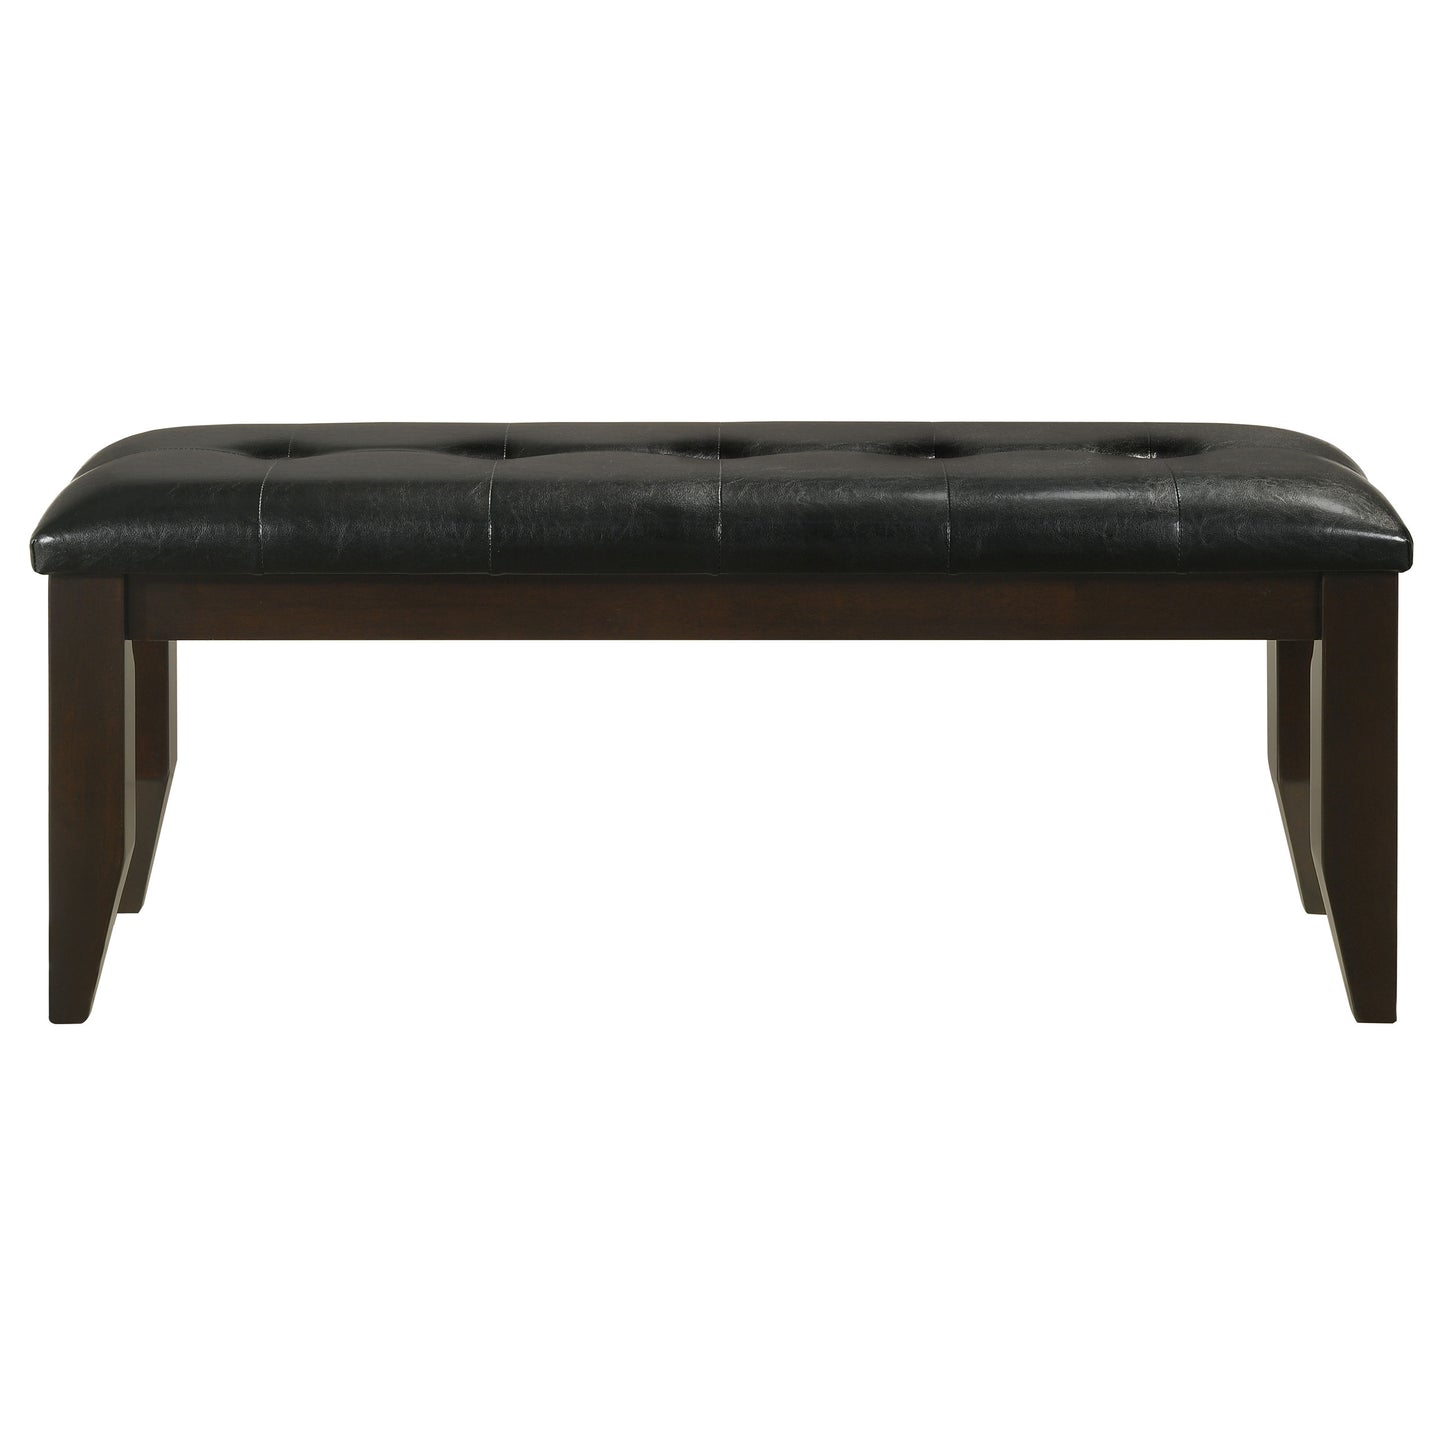 Dalila Tufted Upholstered Dining Bench Cappuccino and Black